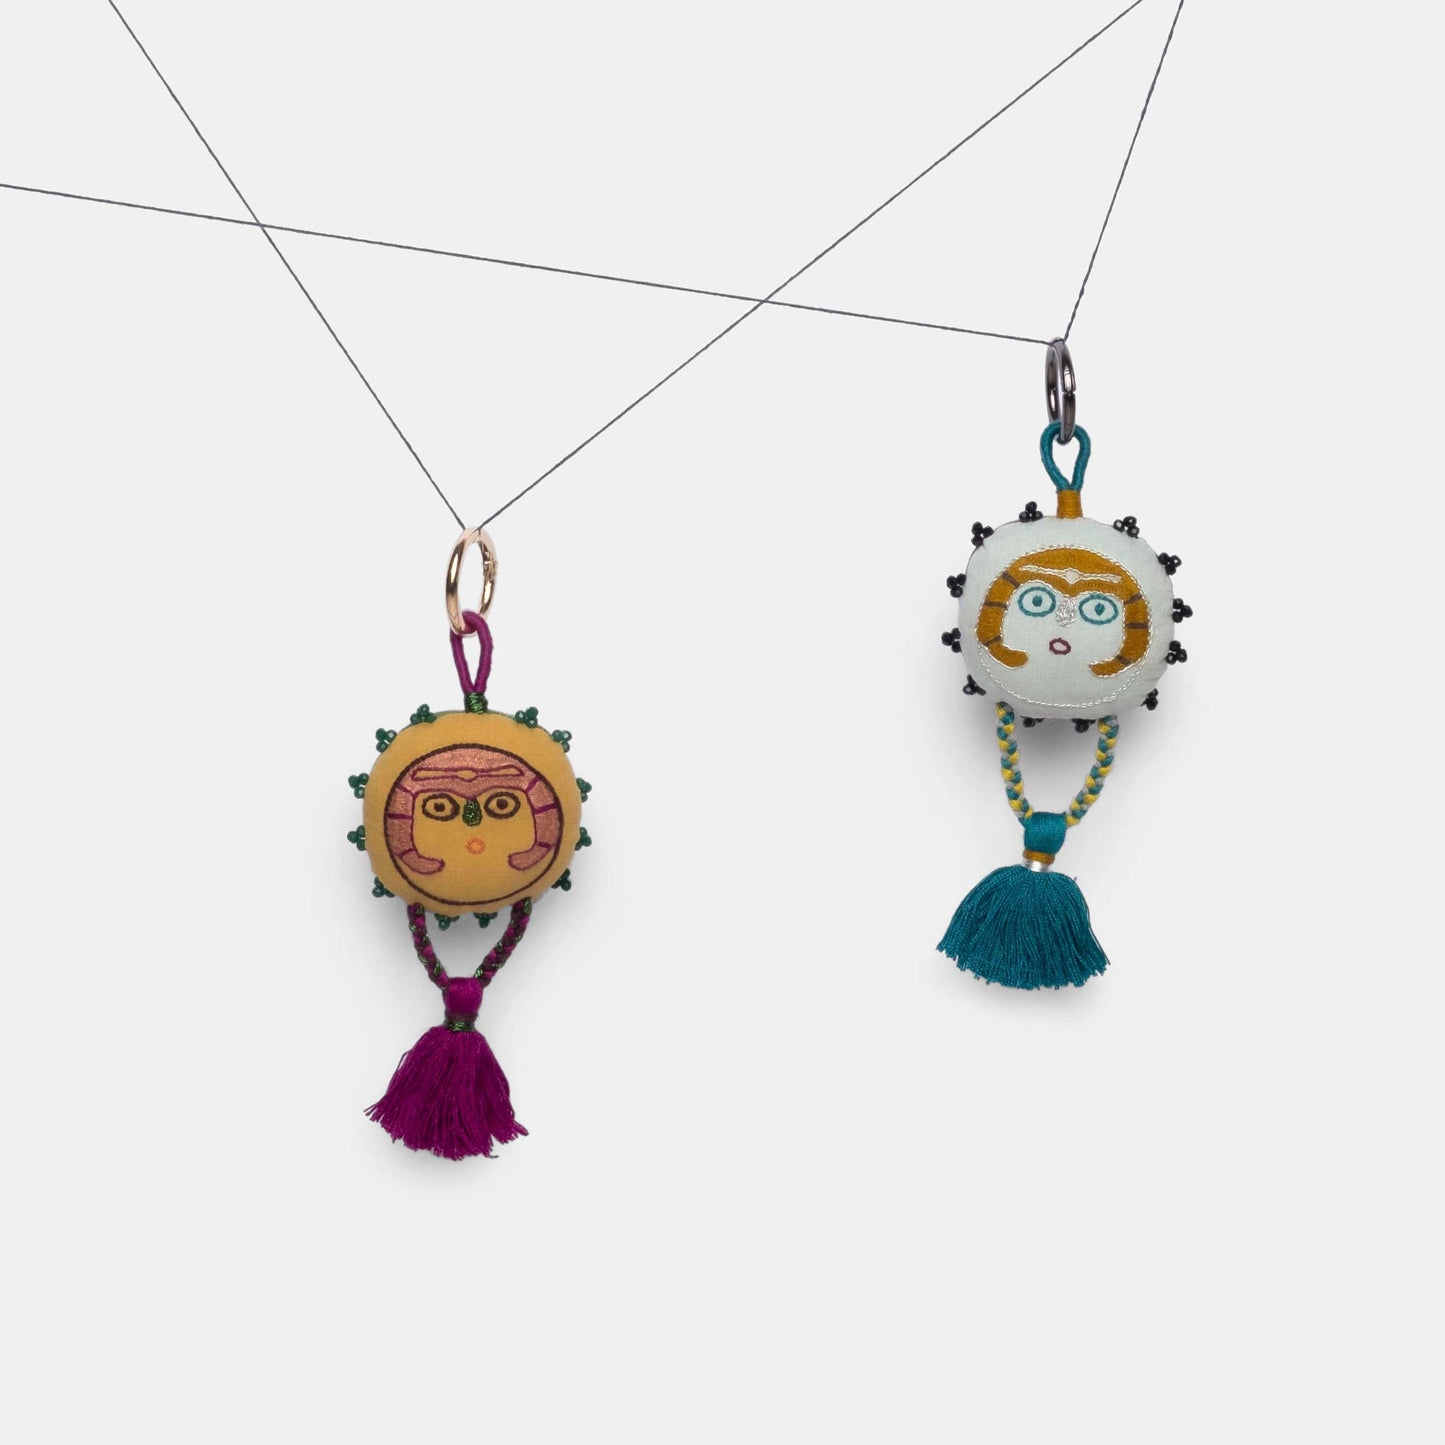 Mustard and Silver Sky Sun Lady charms hanging from a thread